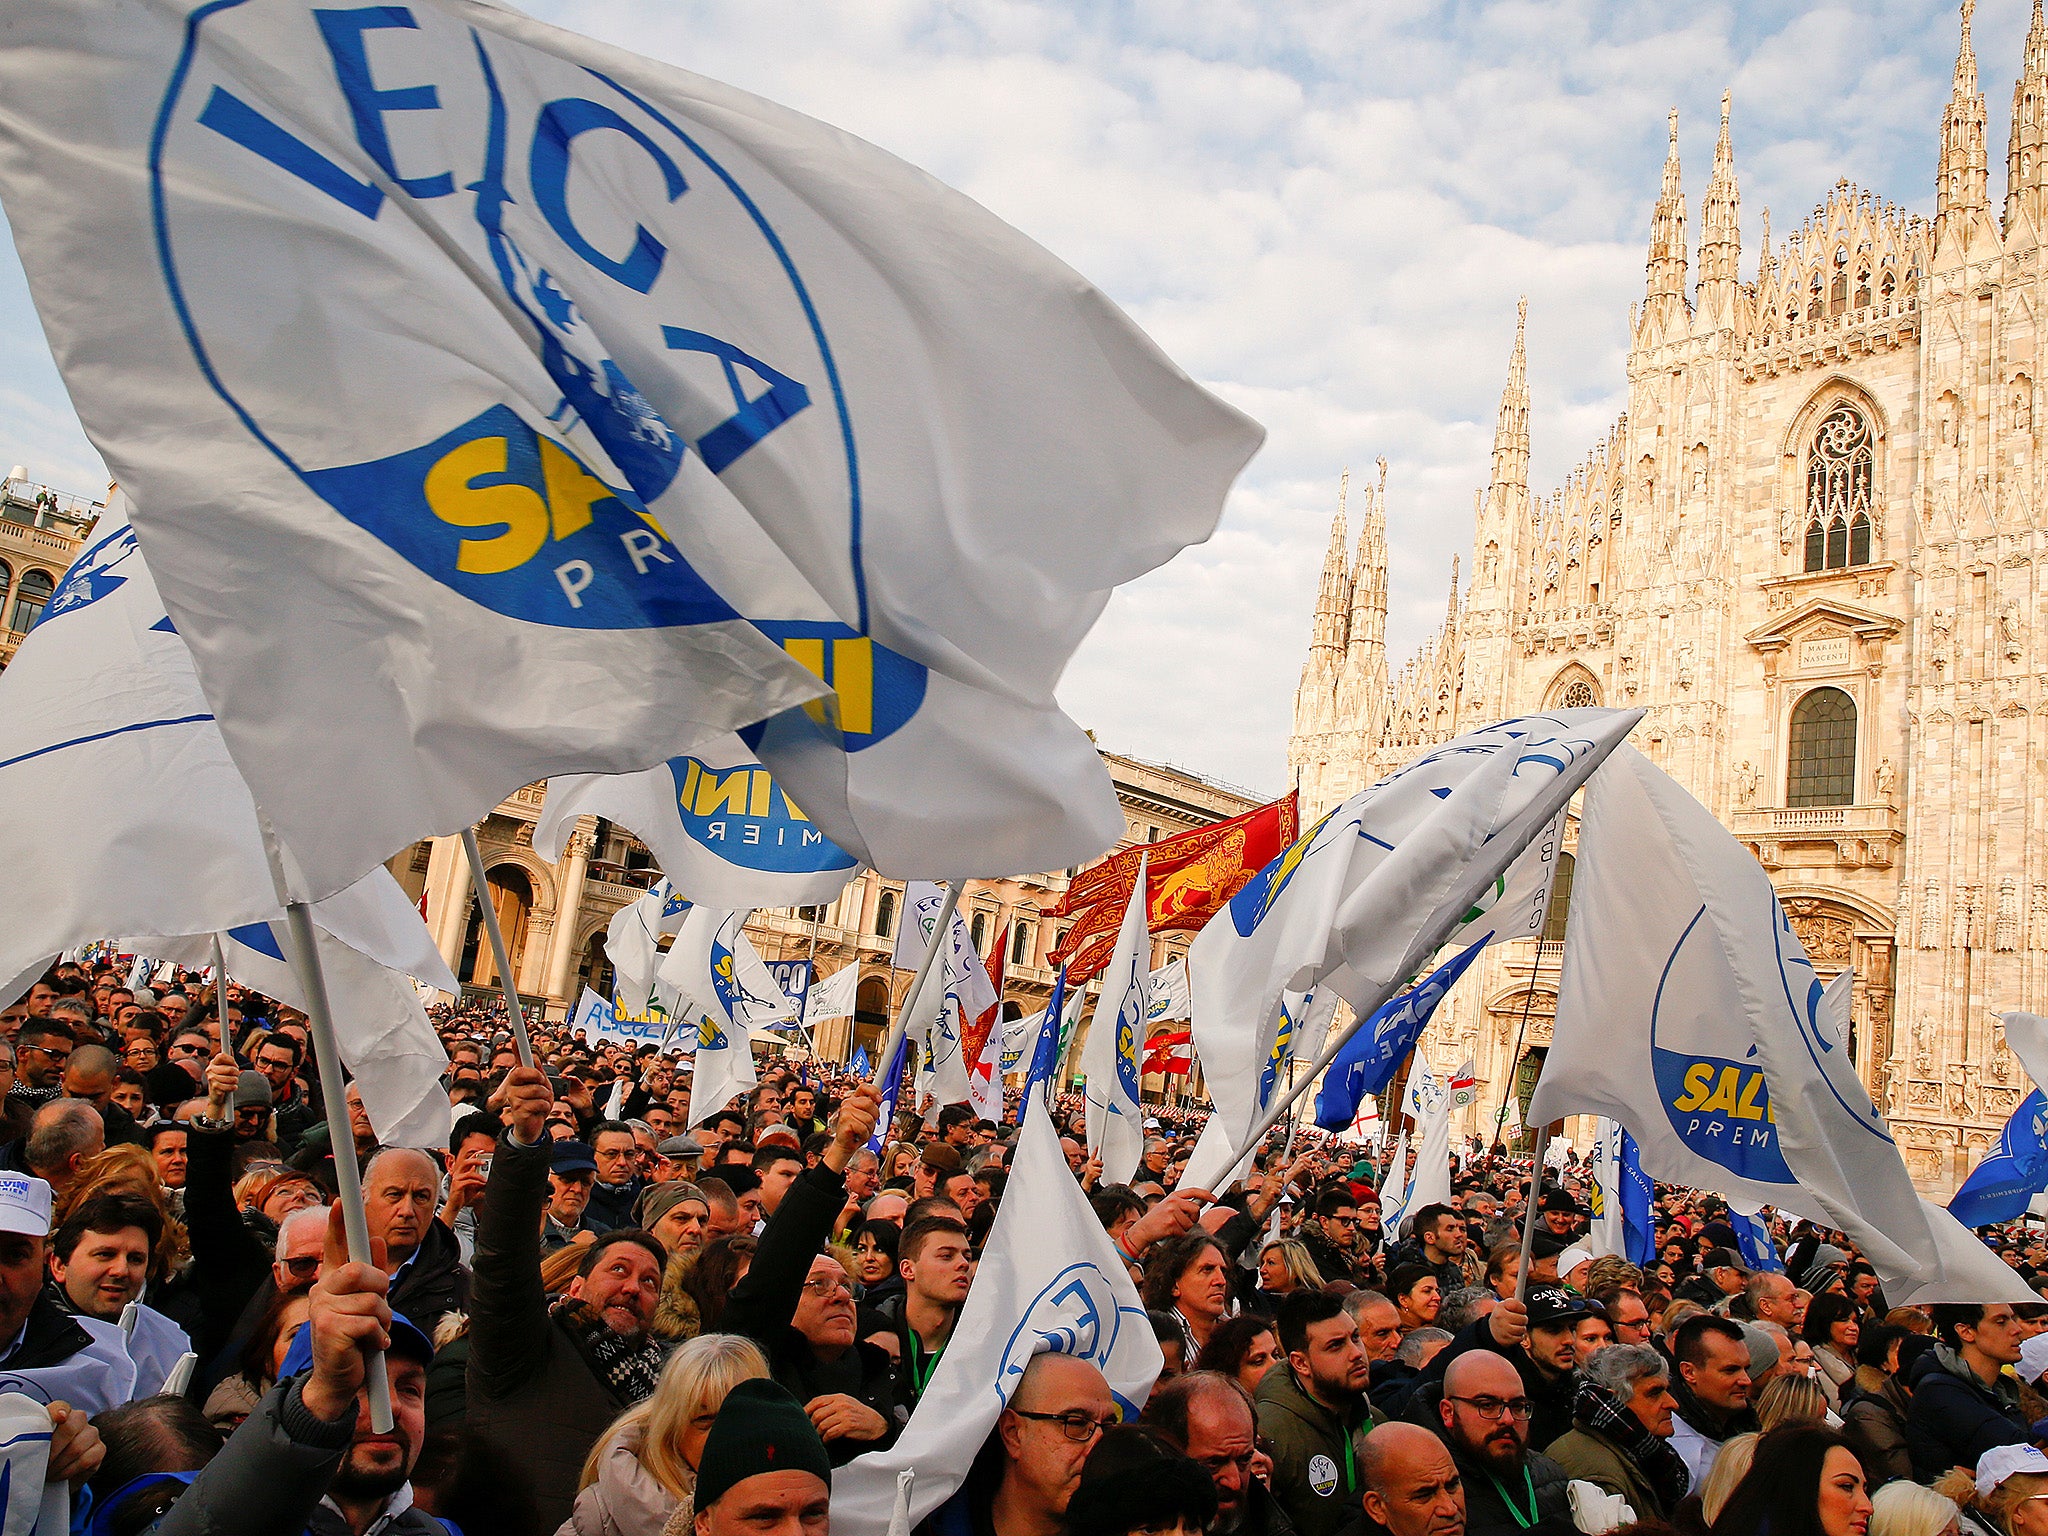 League supporters at a rally in Milan as Italy prepares for a coalition deal